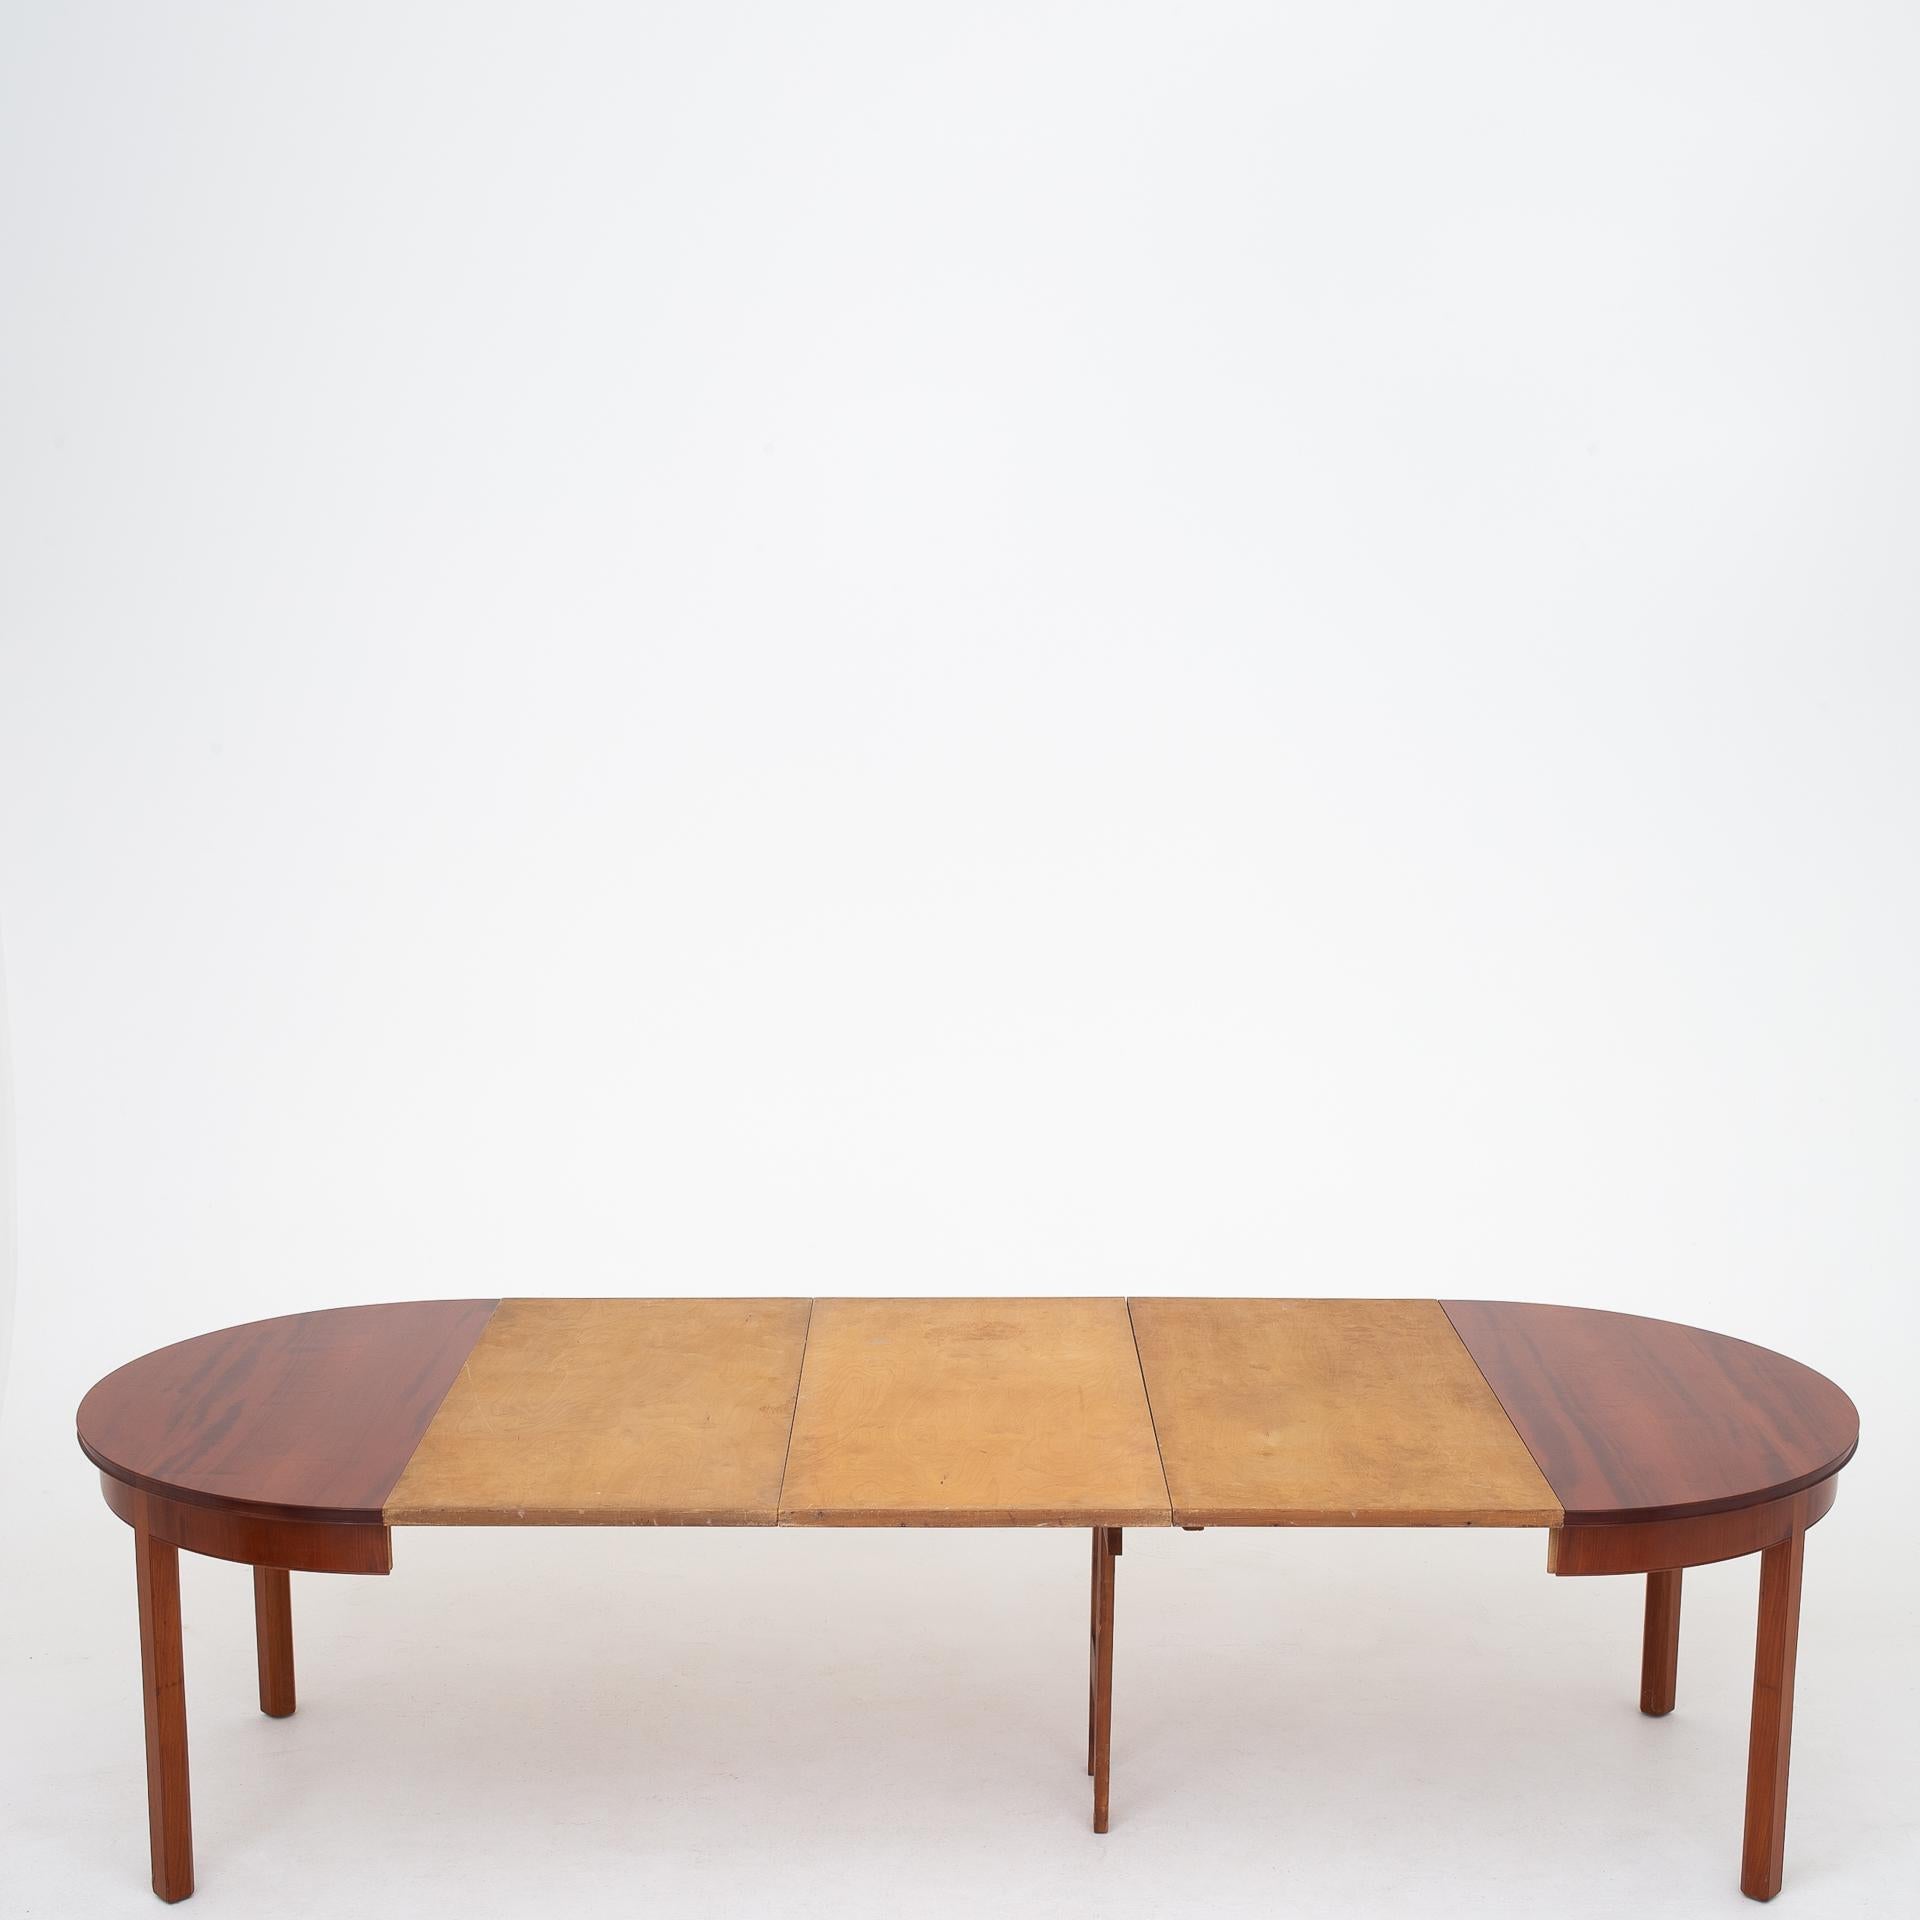 Dining table in solid mahogany by Jacob Kjær In Good Condition For Sale In Copenhagen, DK